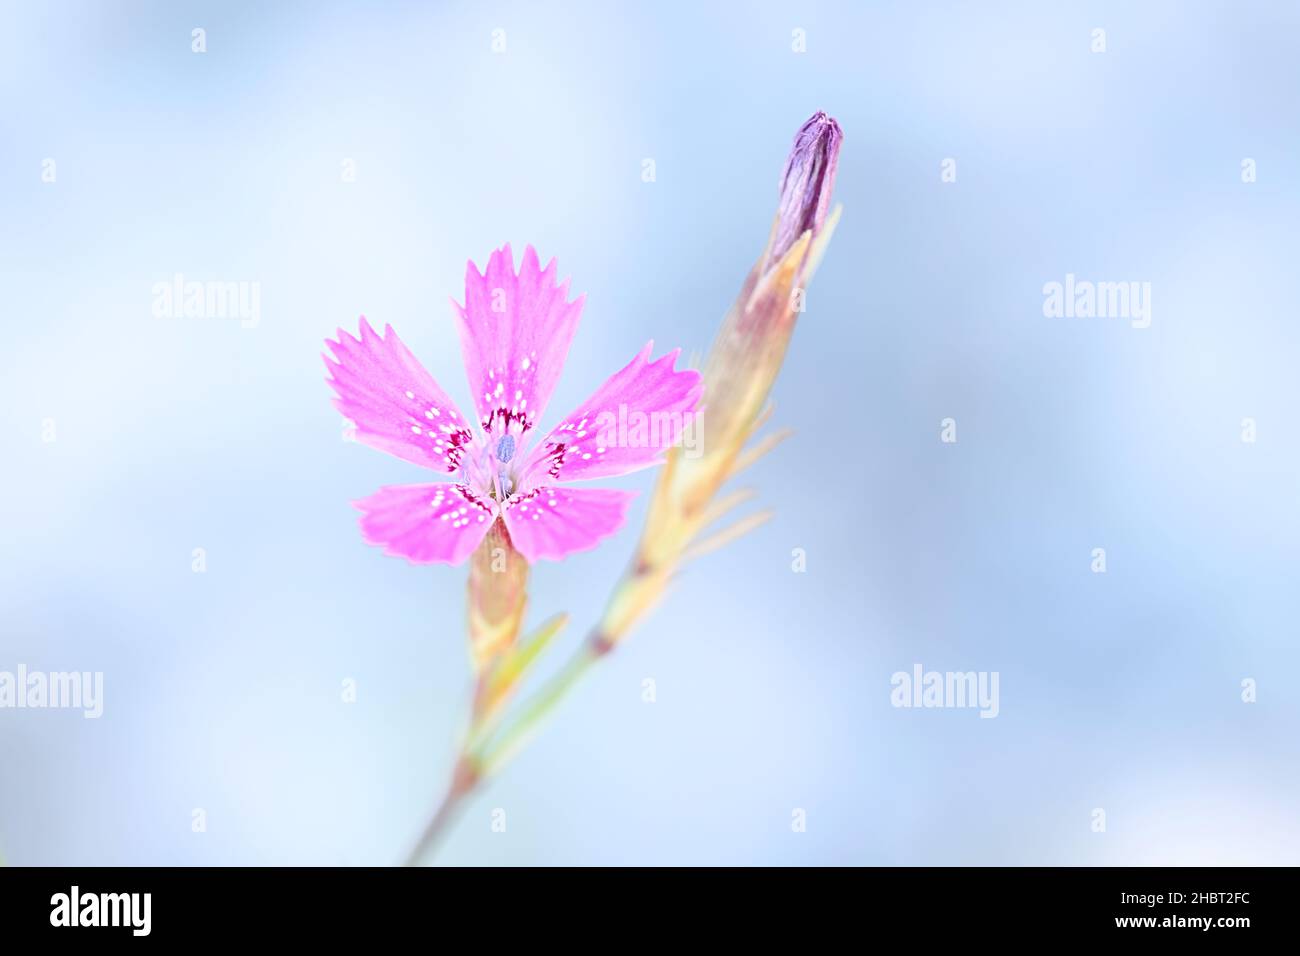 Dianthus deltoides, commonly known as Maiden pink, wild flower from Finland Stock Photo